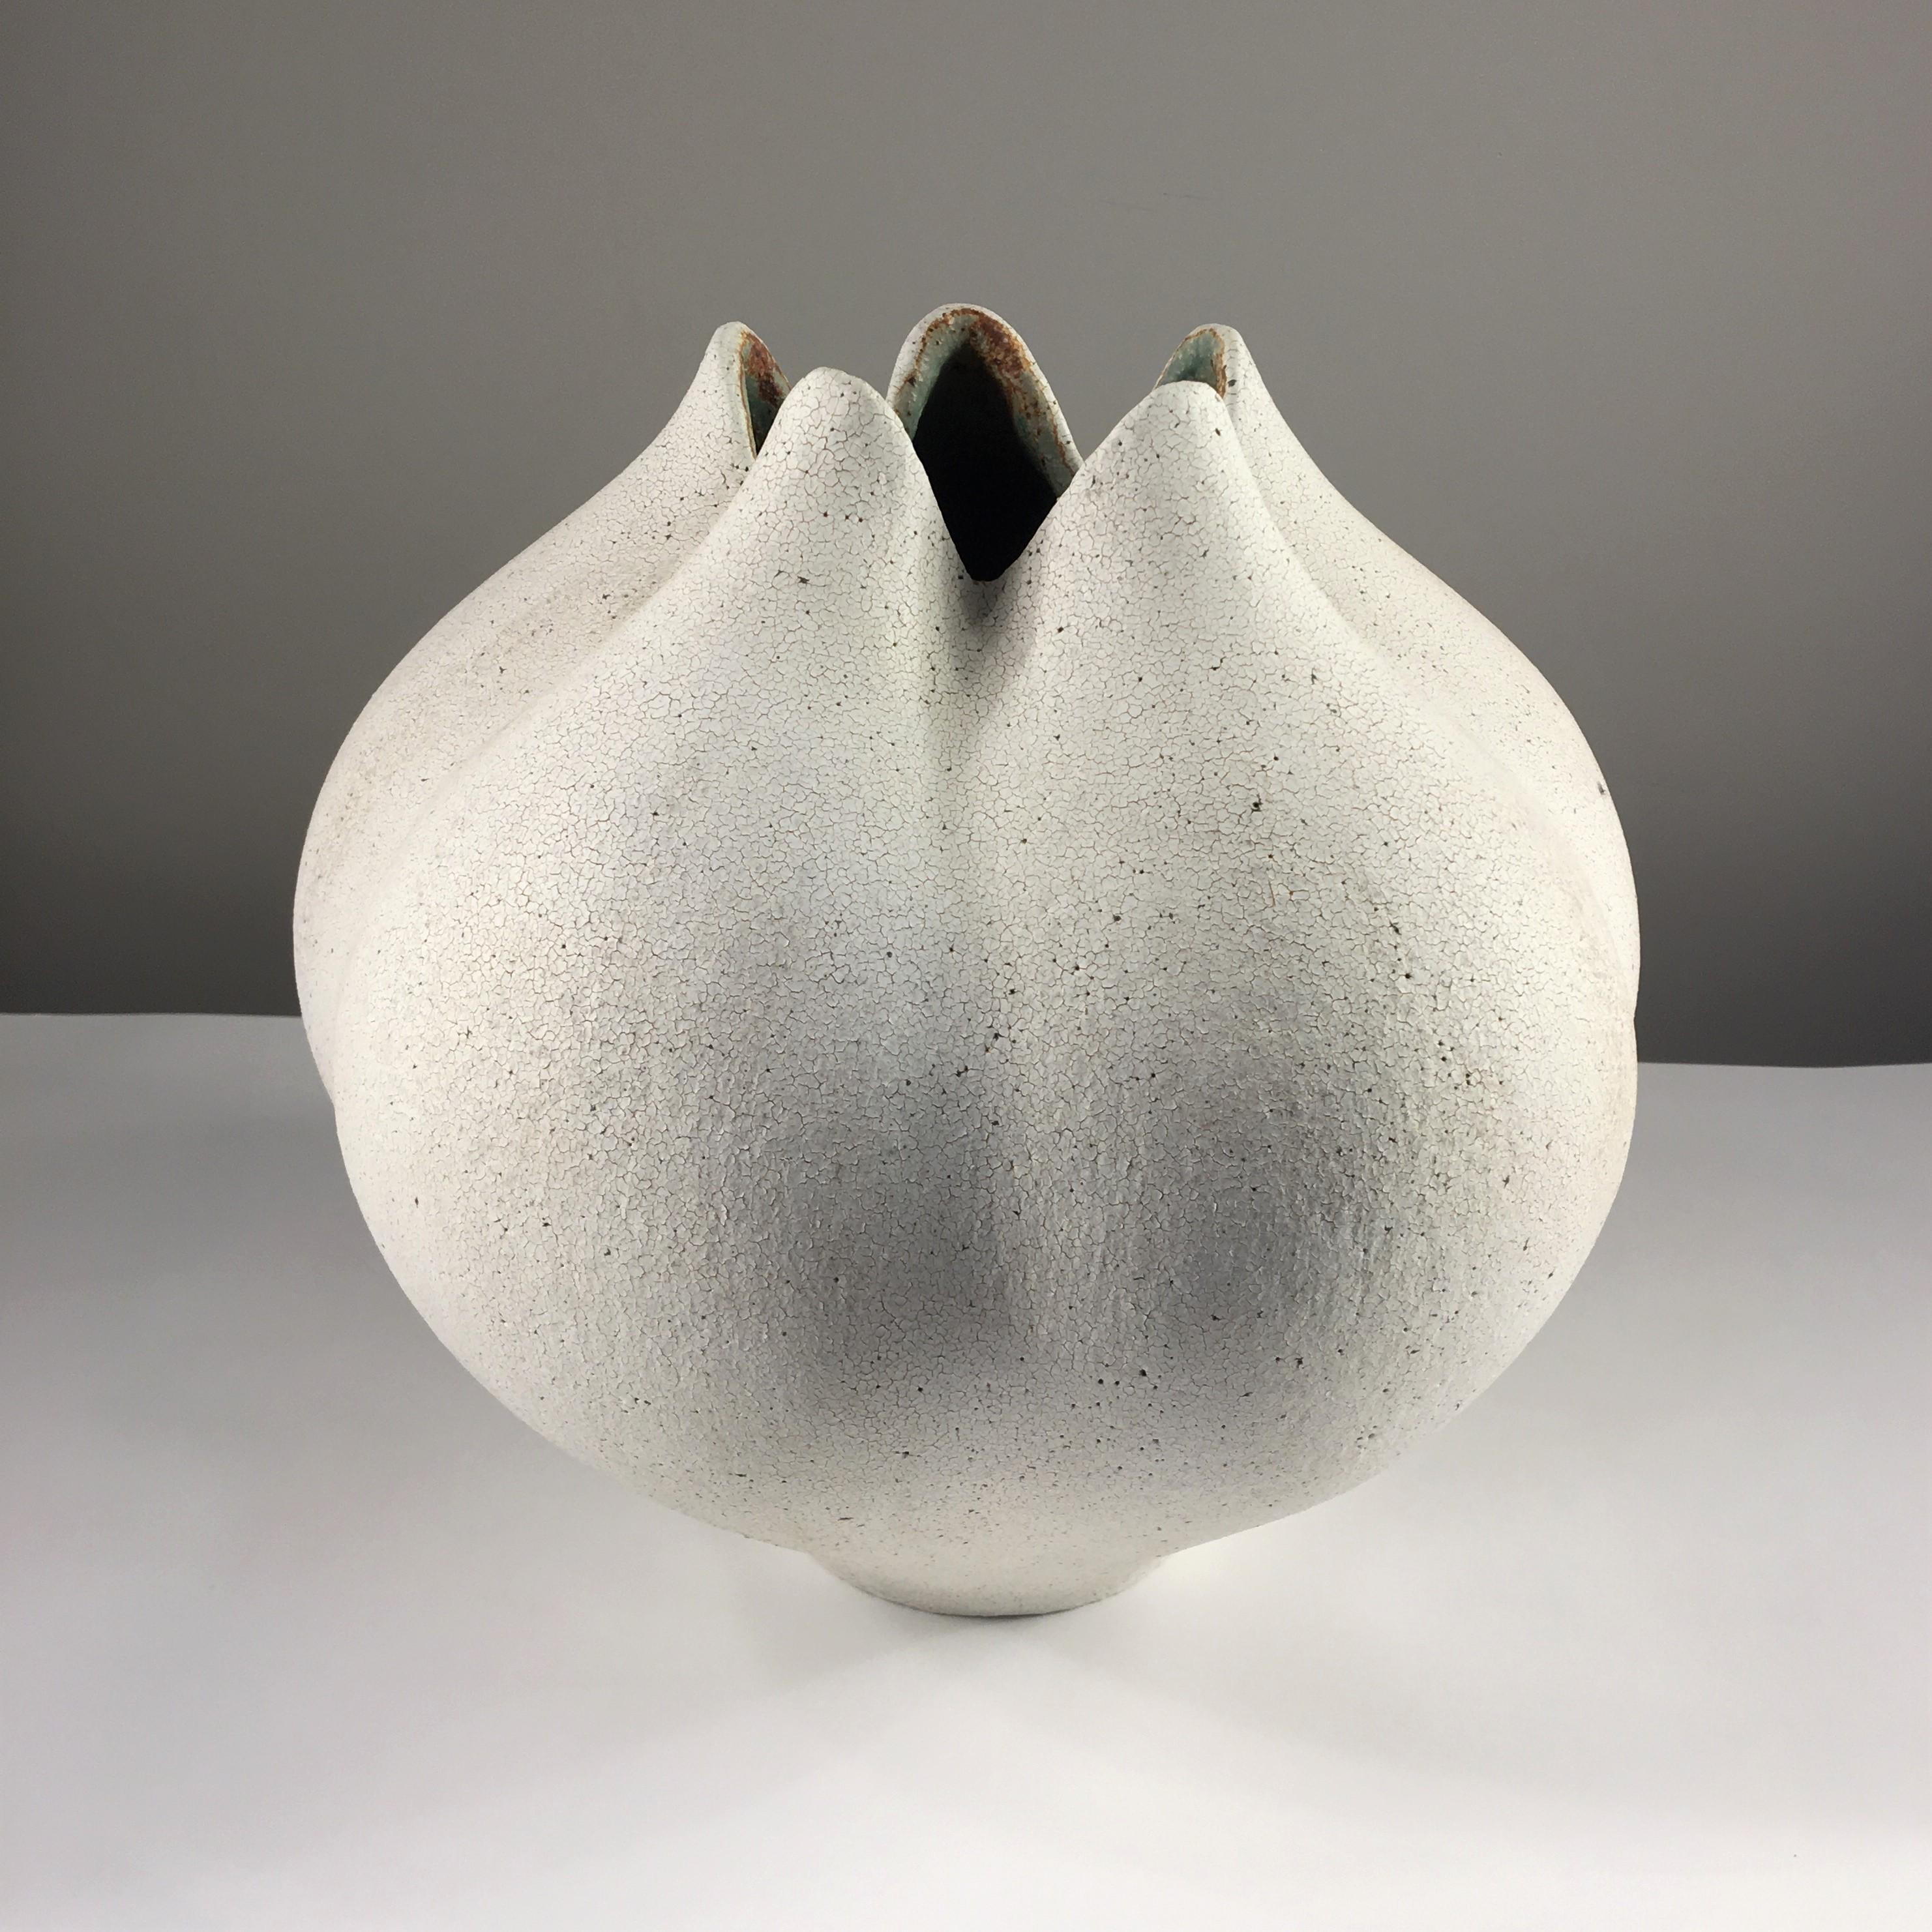 Organic Modern Round Ceramic Blossom Vase with Petals by Yumiko Kuga For Sale